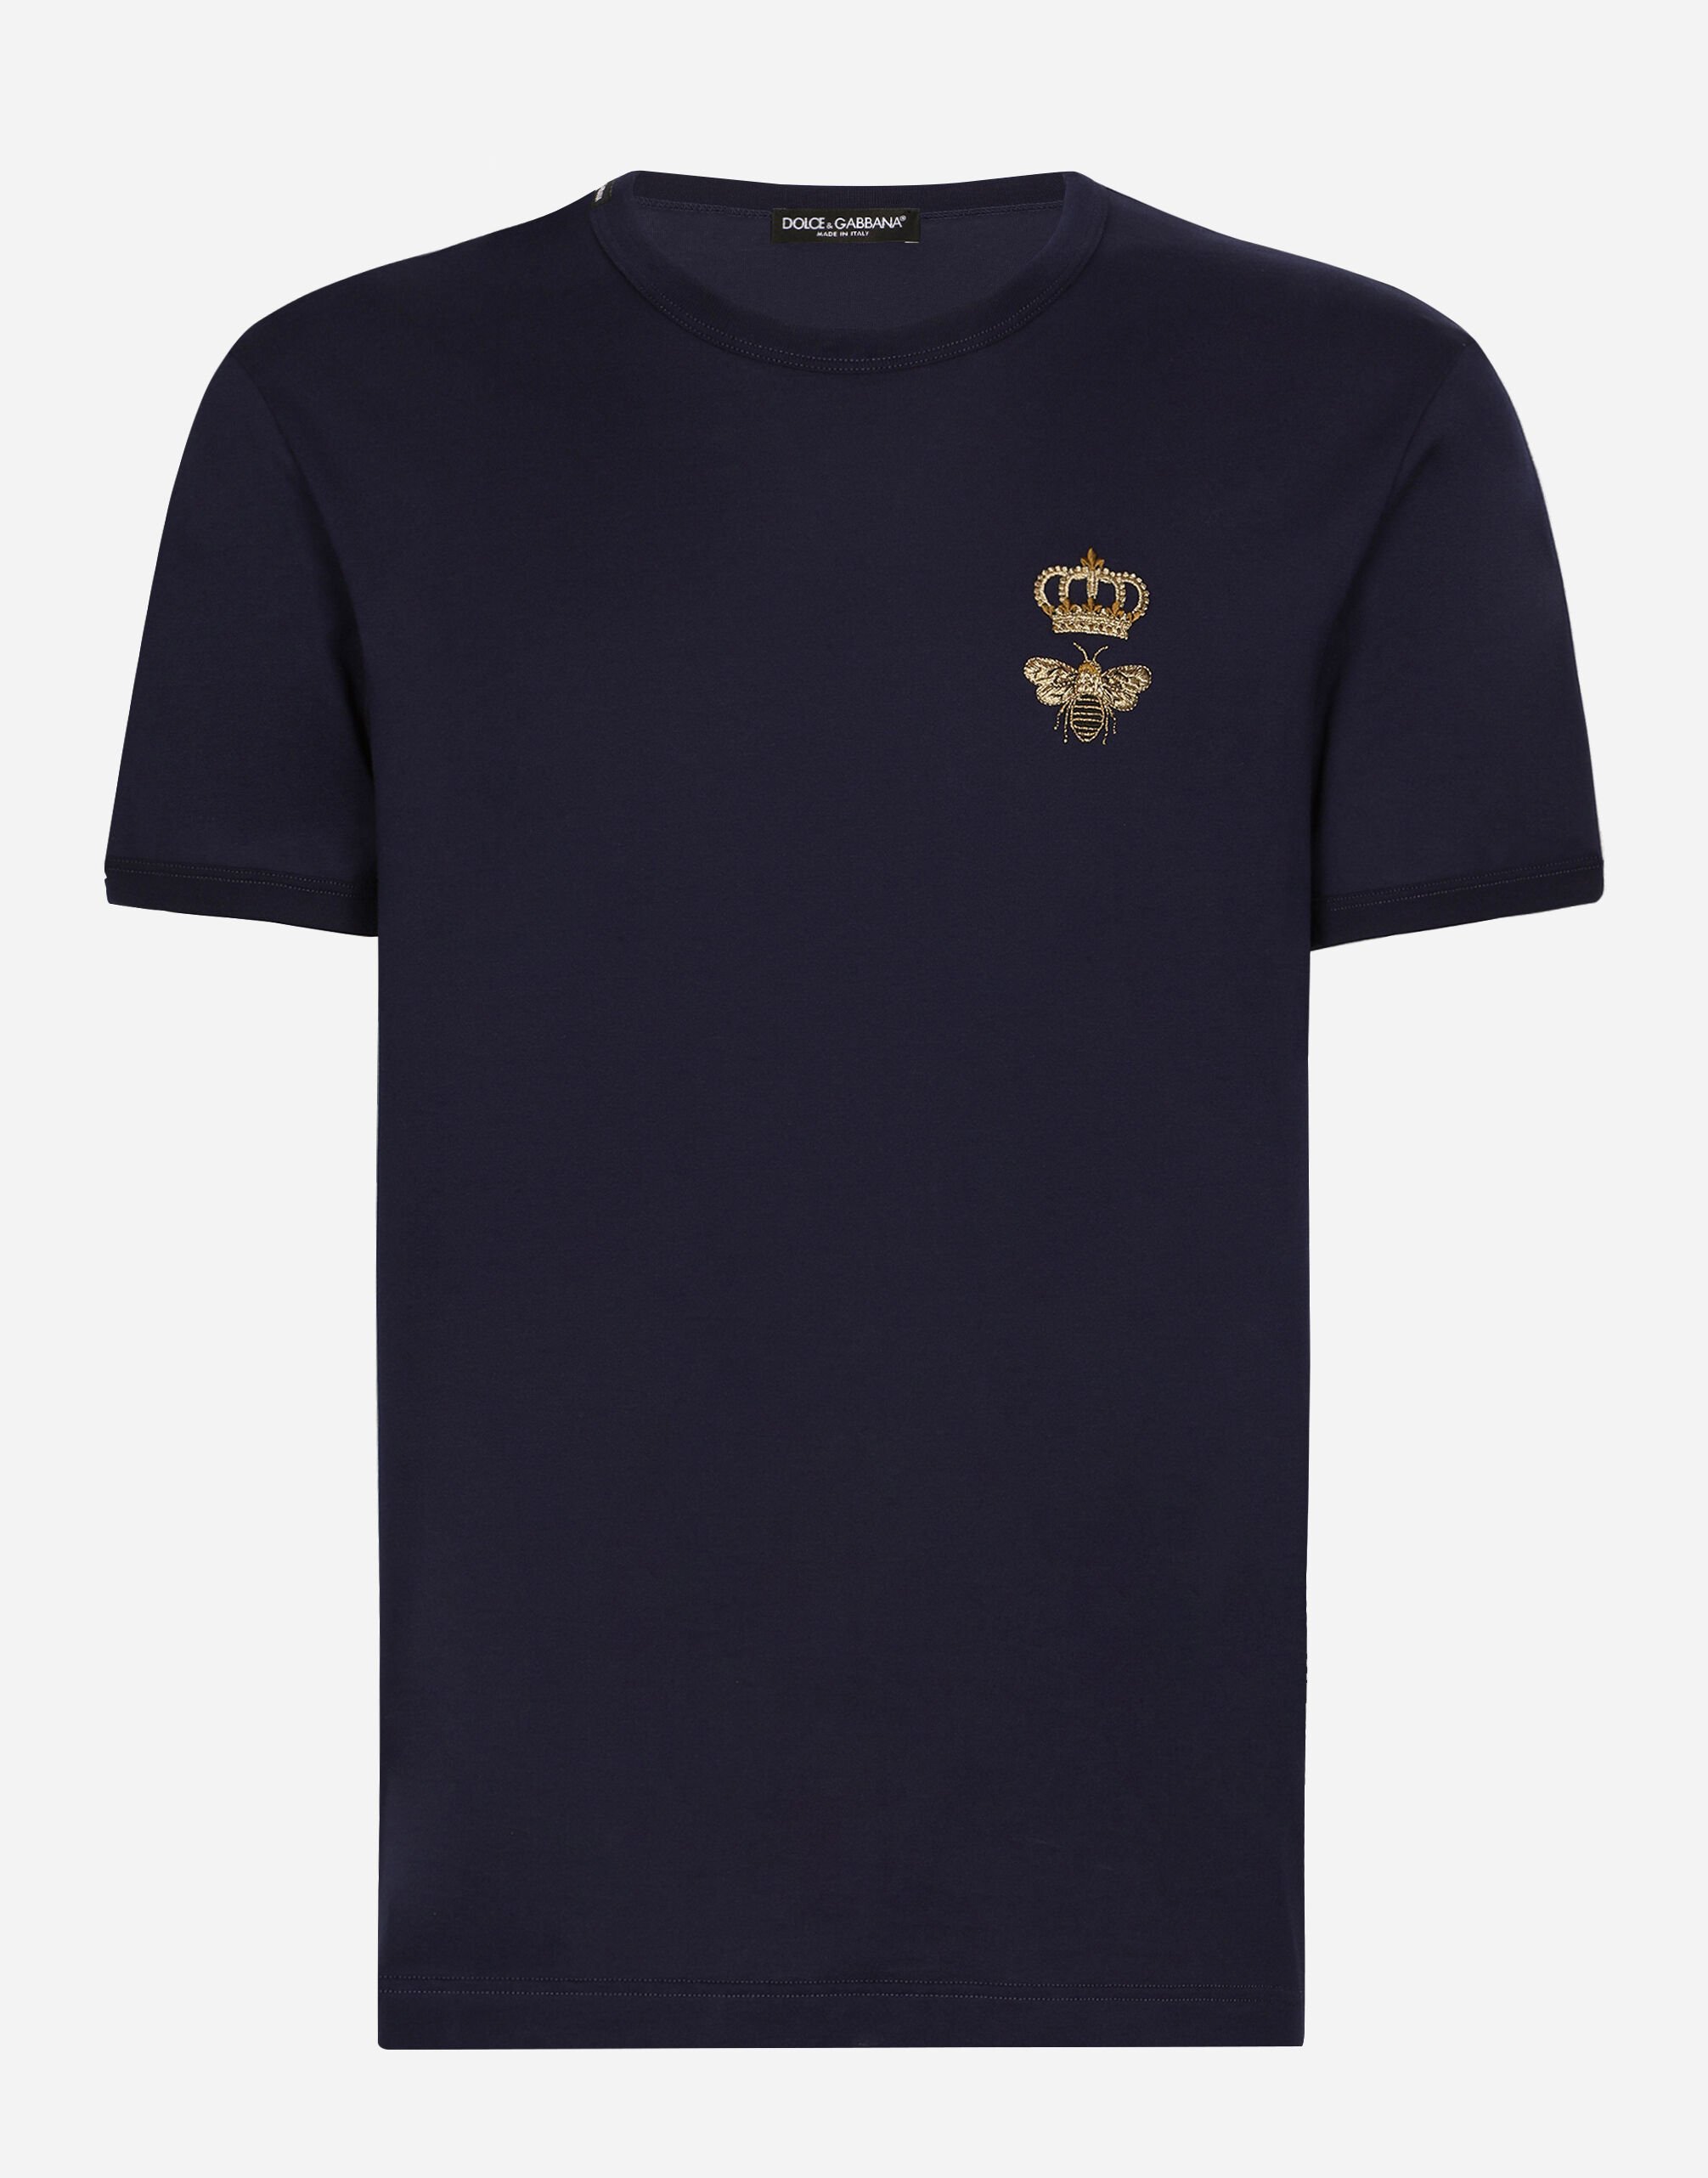 Dolce & Gabbana Cotton T-shirt with embroidery Blue G8PL4TG7F2H